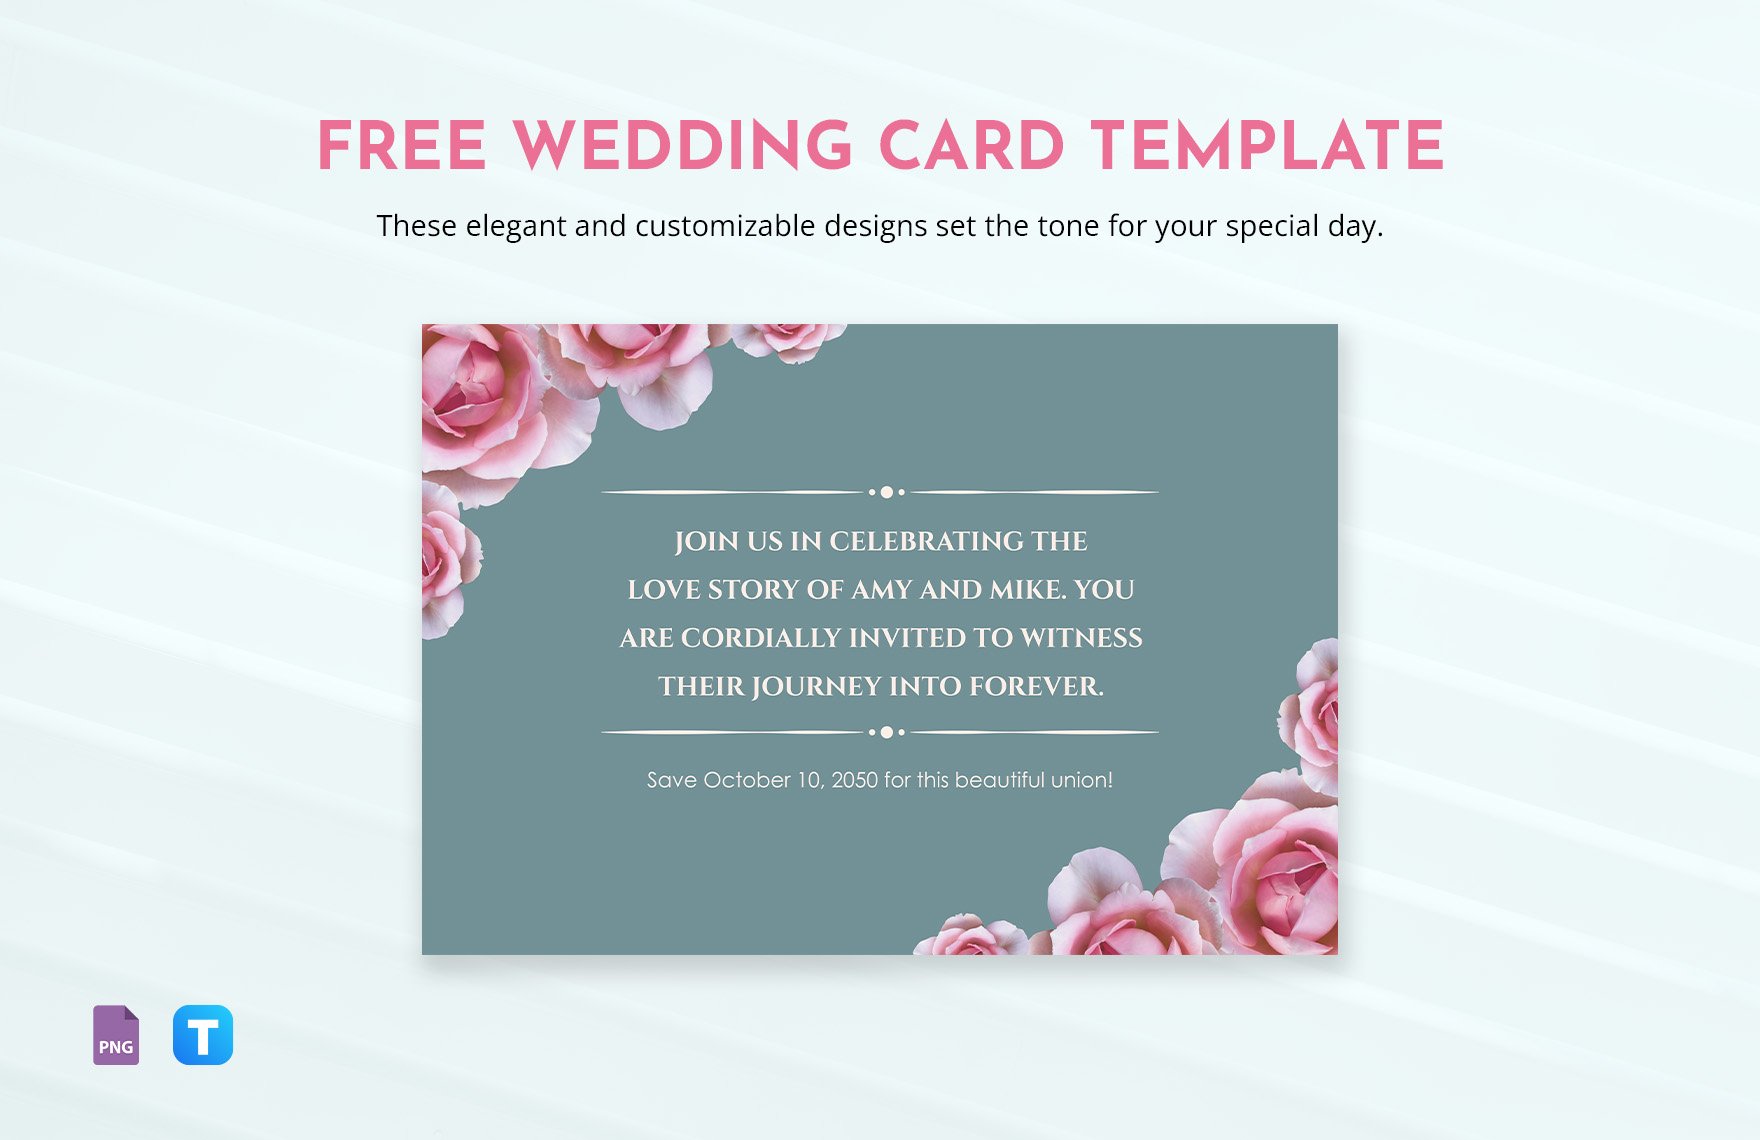 Free Wedding Card Template in PNG